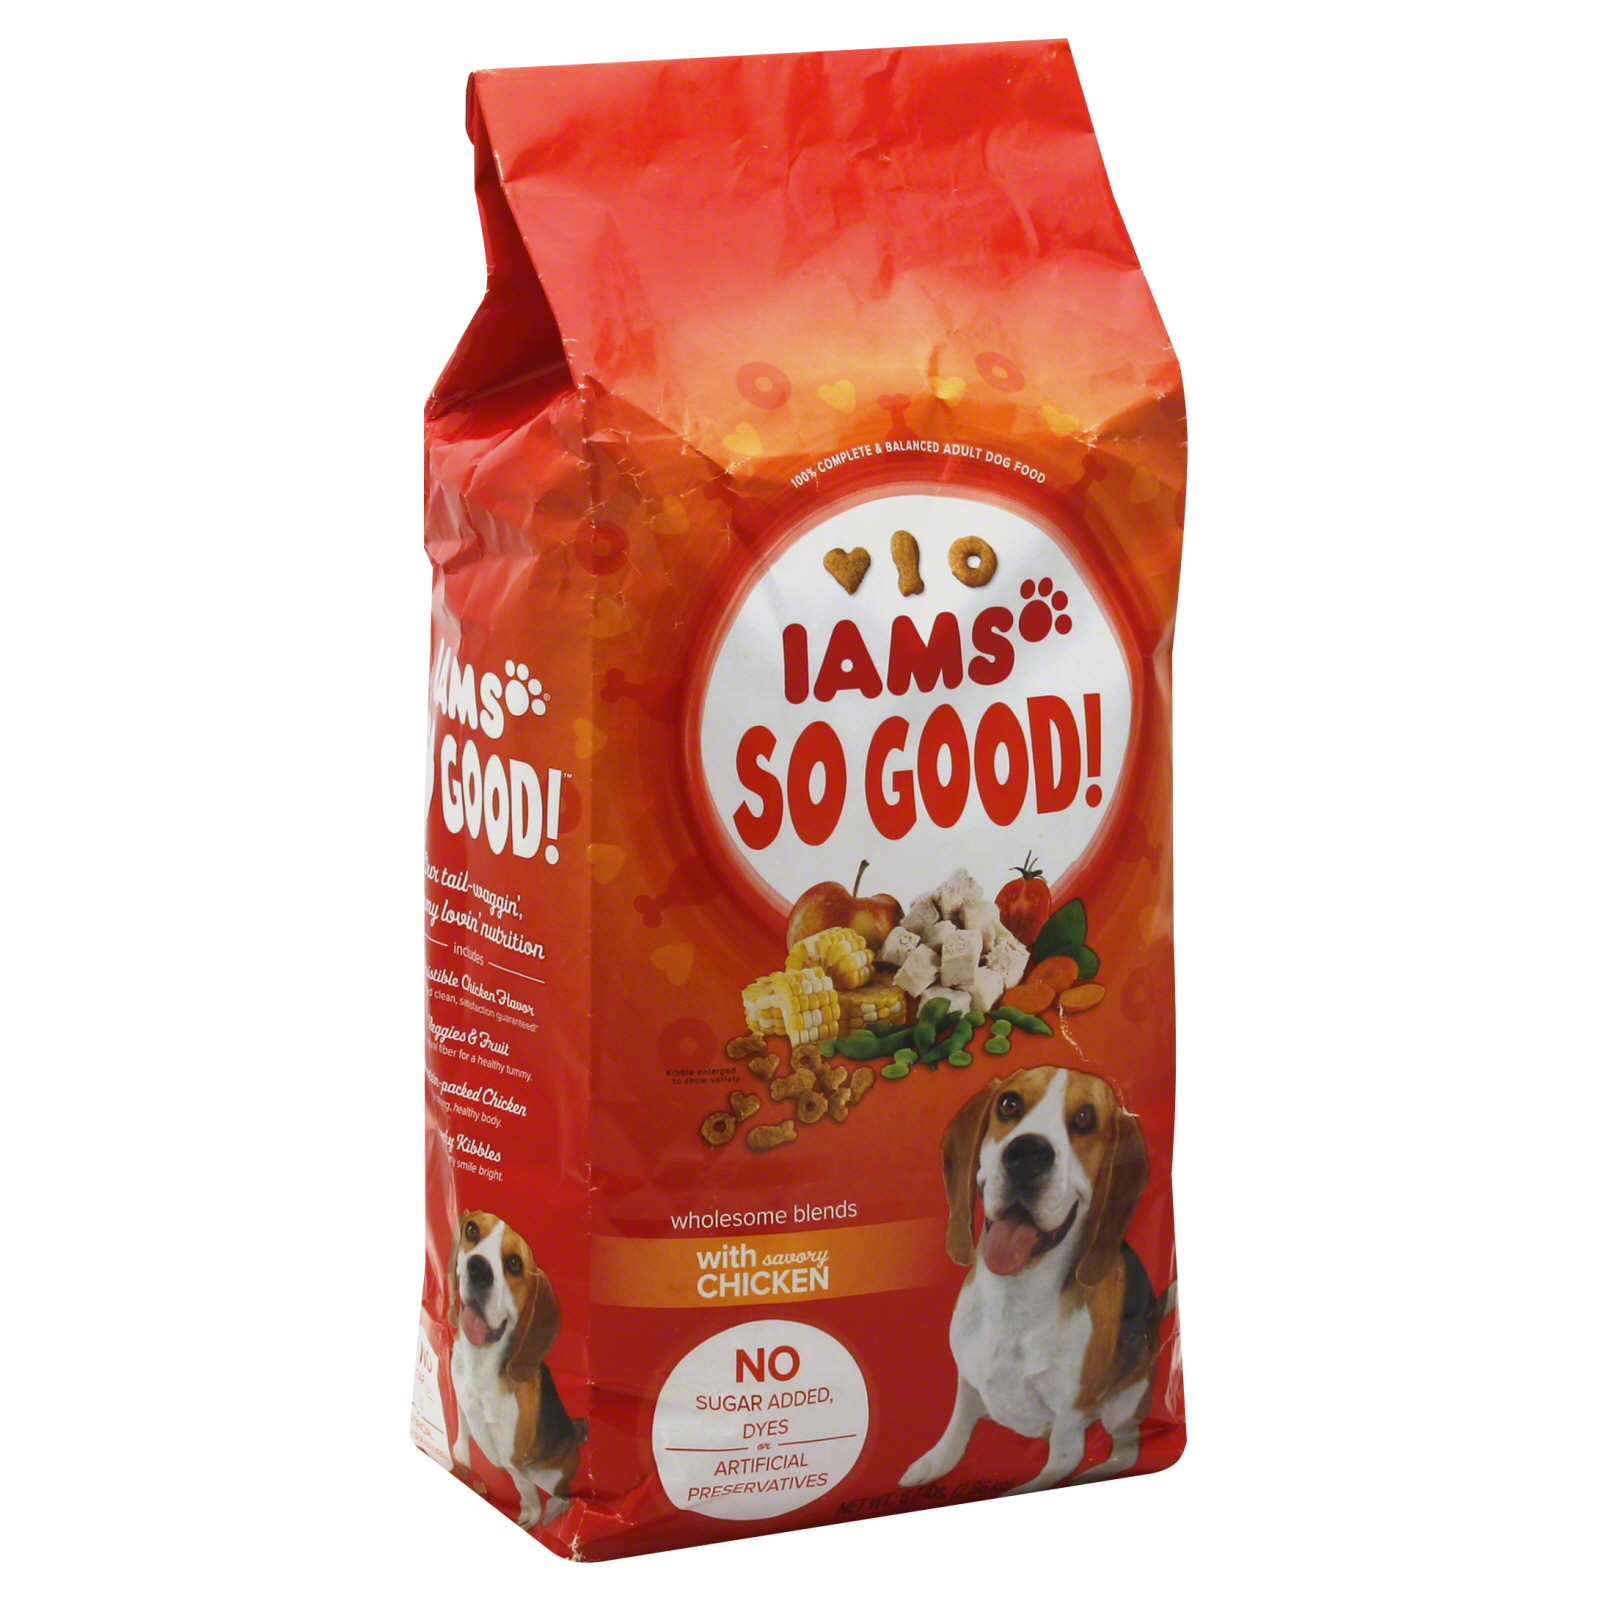 Iams So Good! Wholesome Blends with Savory Chicken Dog Food, 6.3 lb. Bag